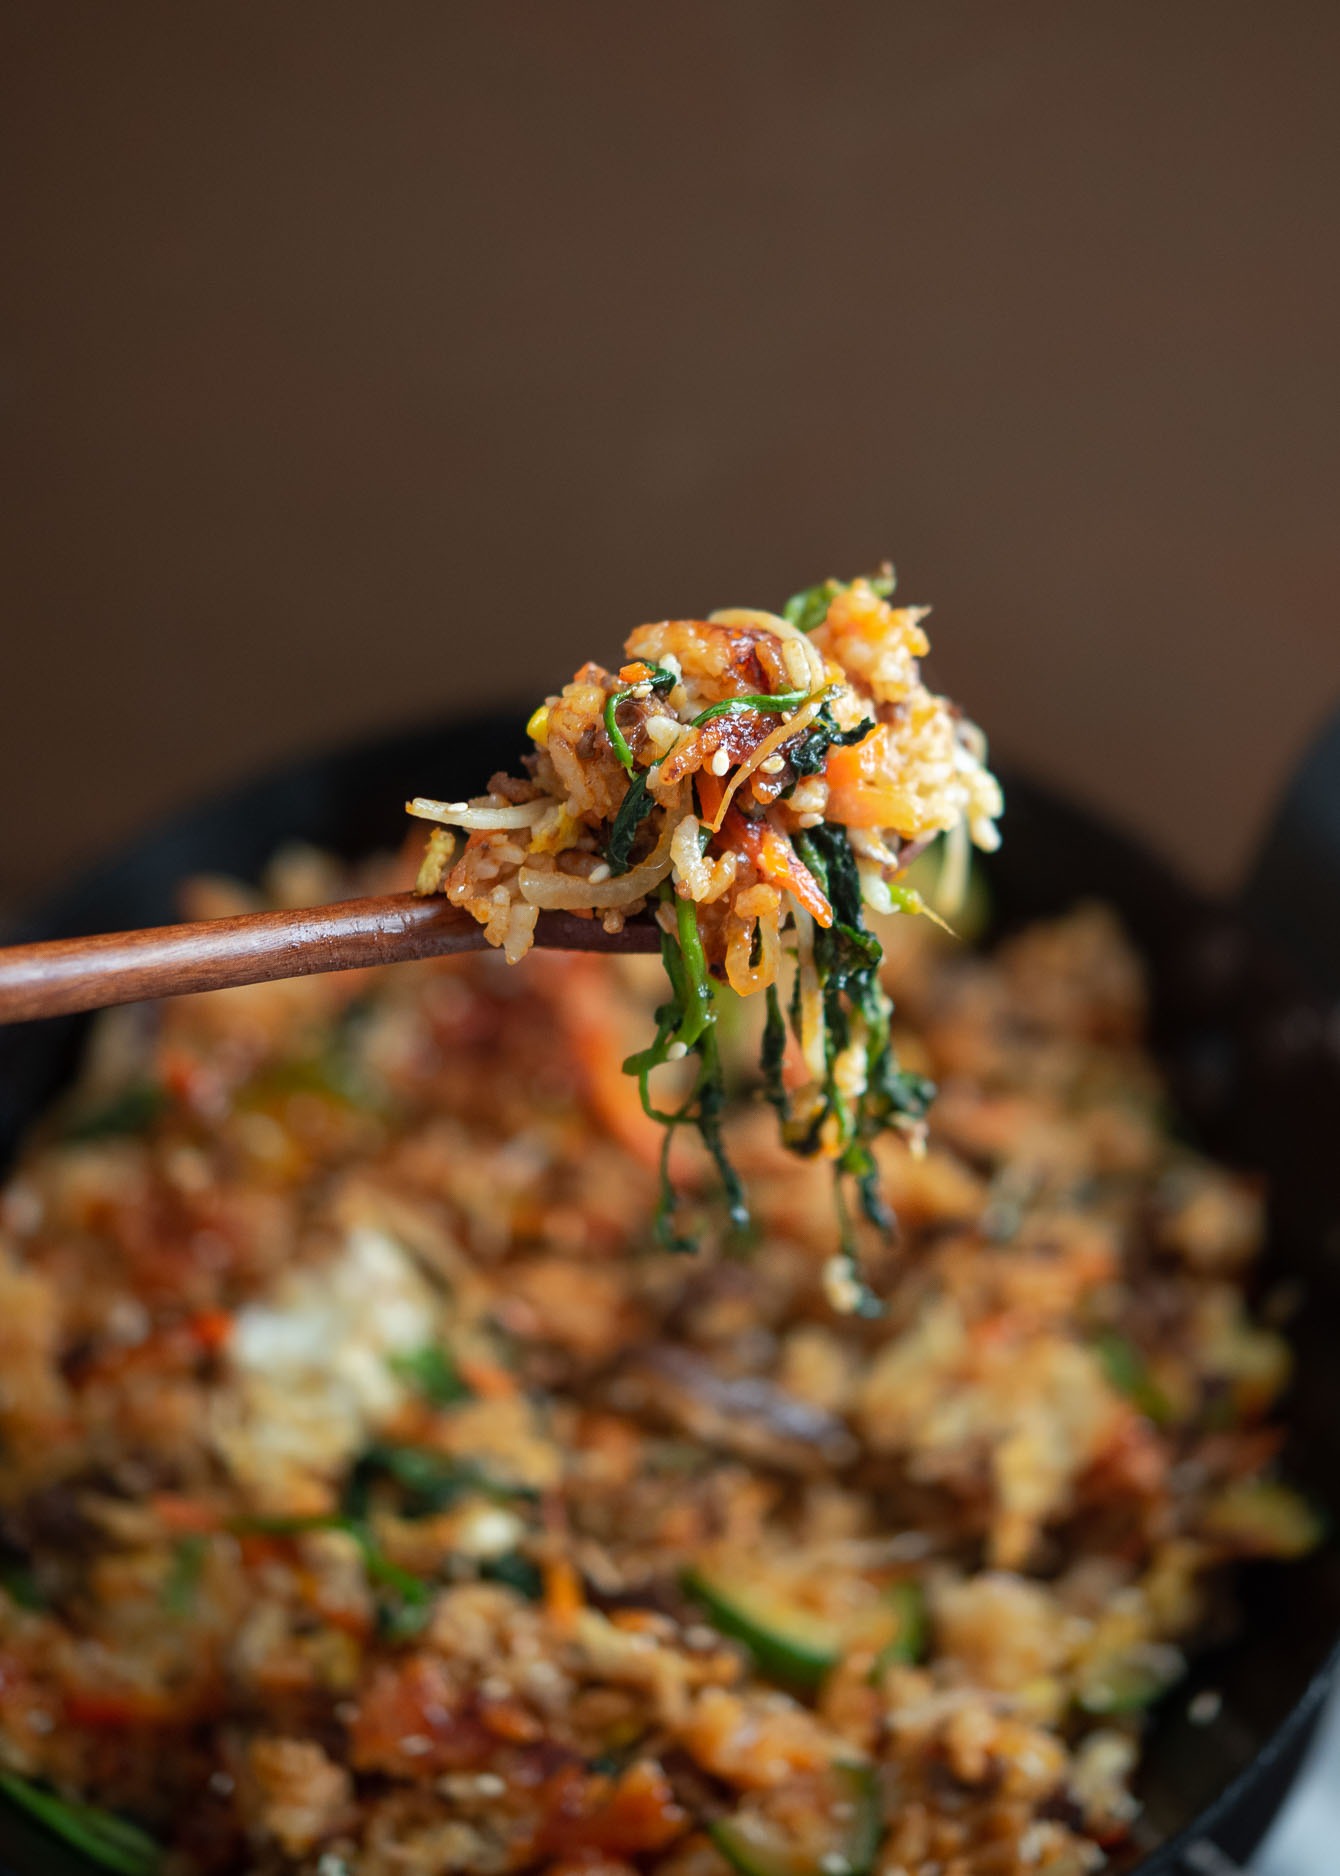 A spoonful of bibimbap shows its deliciousness